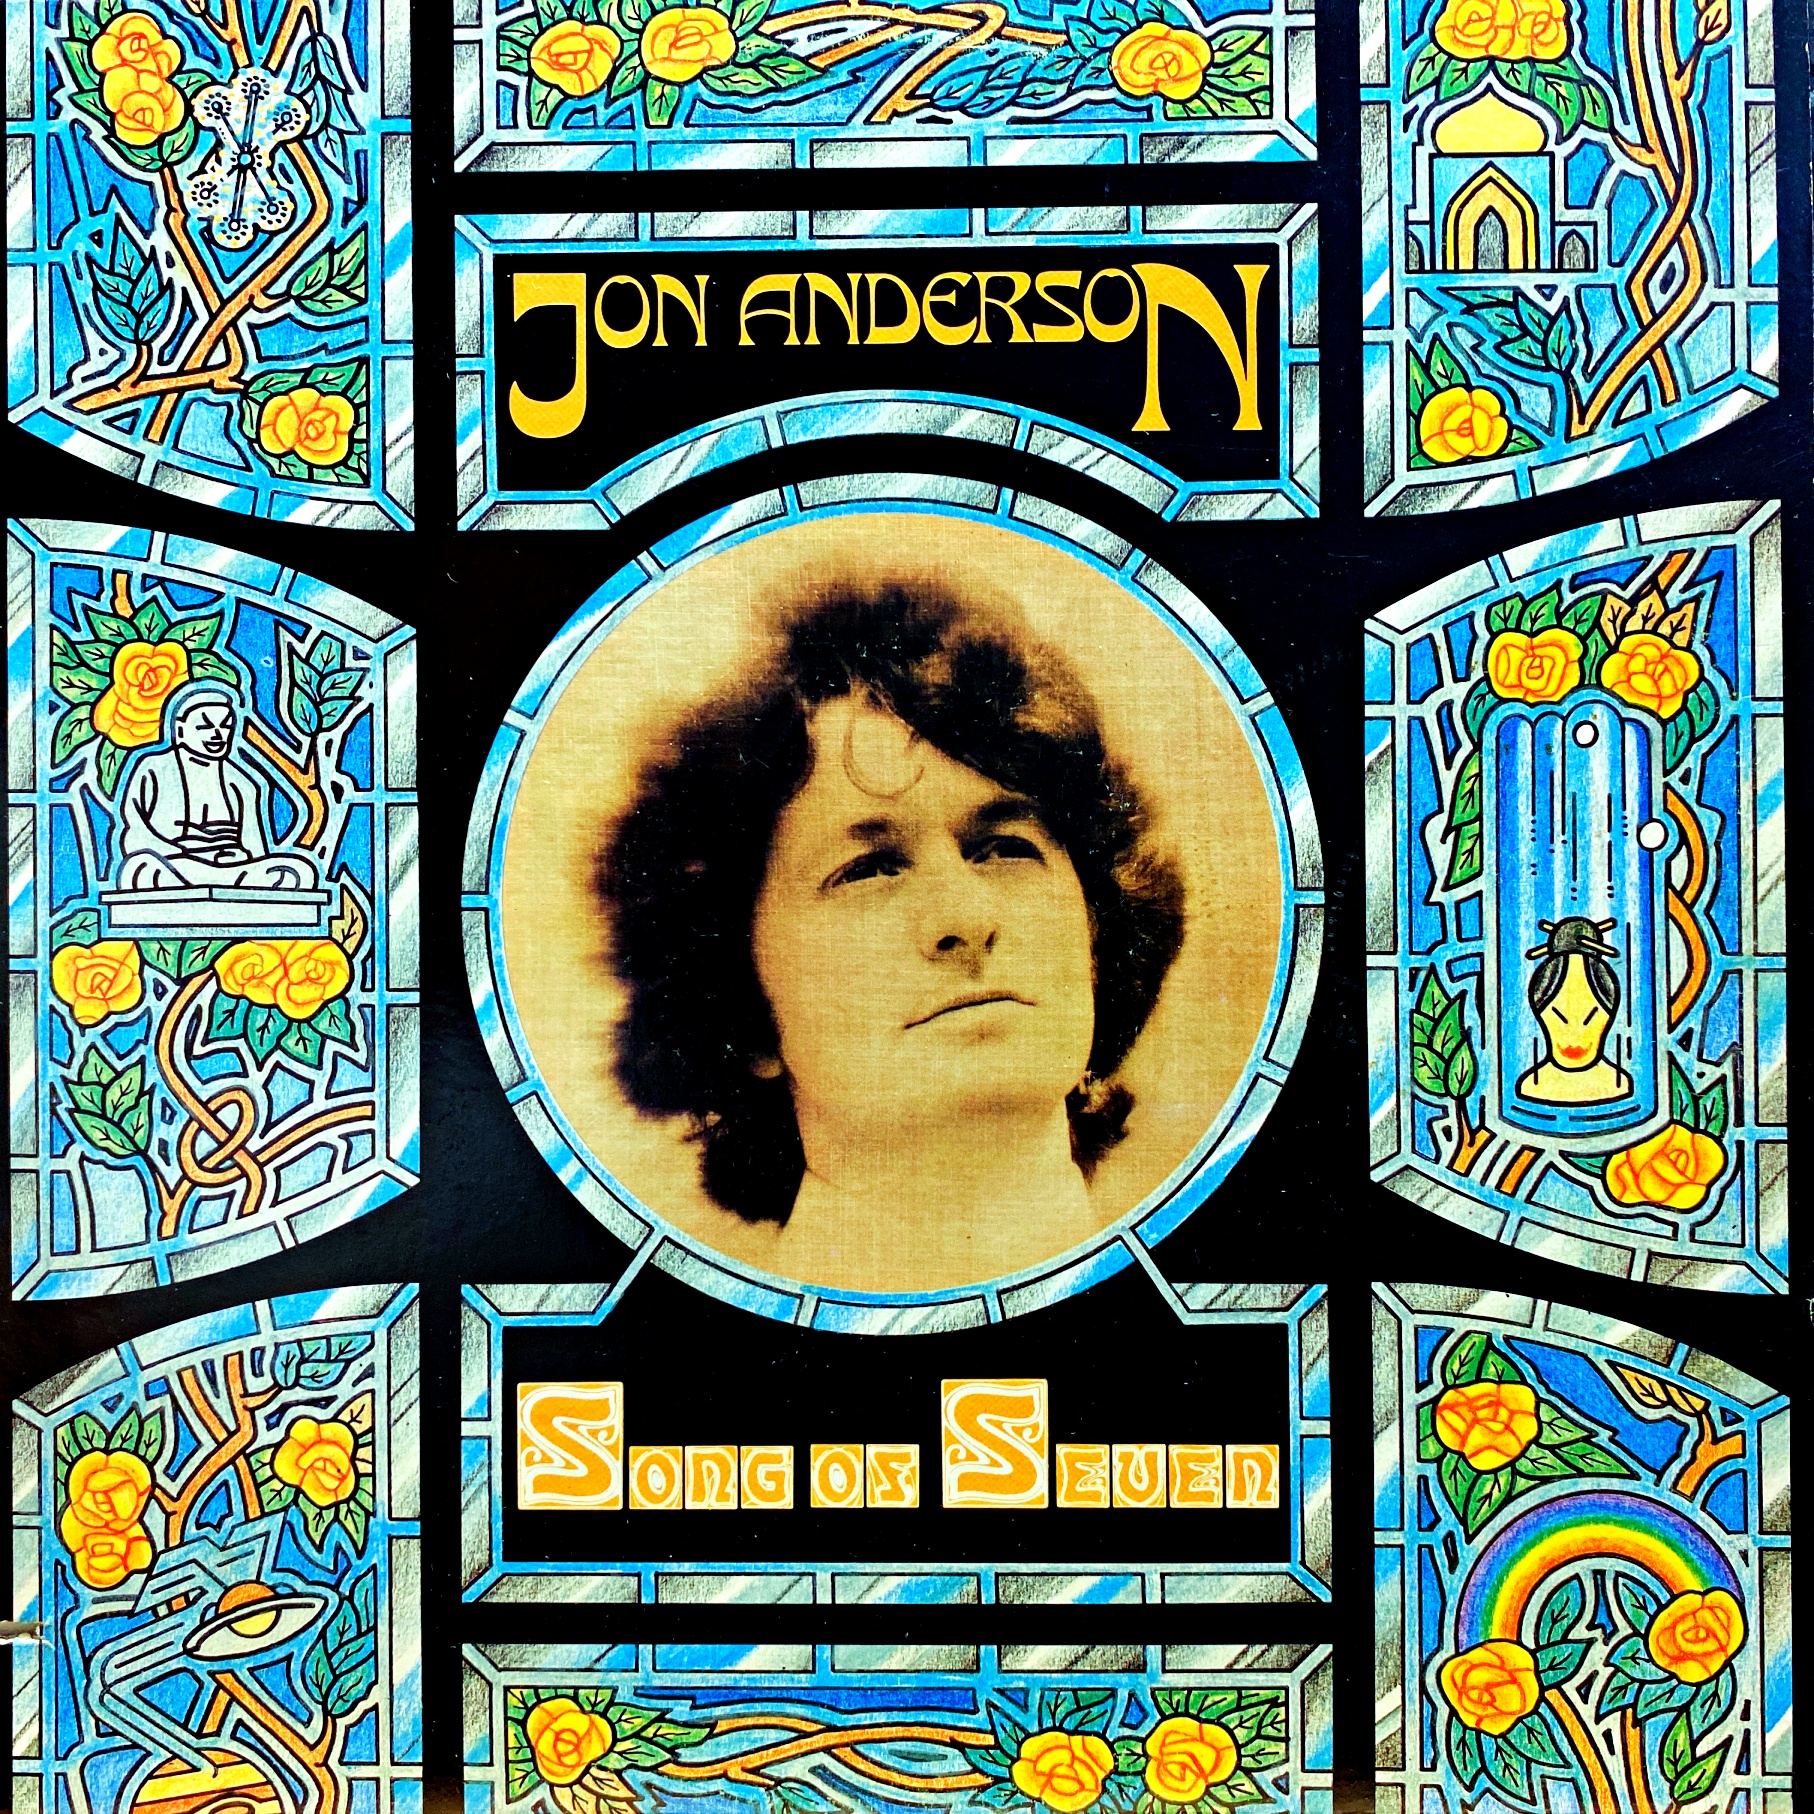 LP Jon Anderson – Song Of Seven